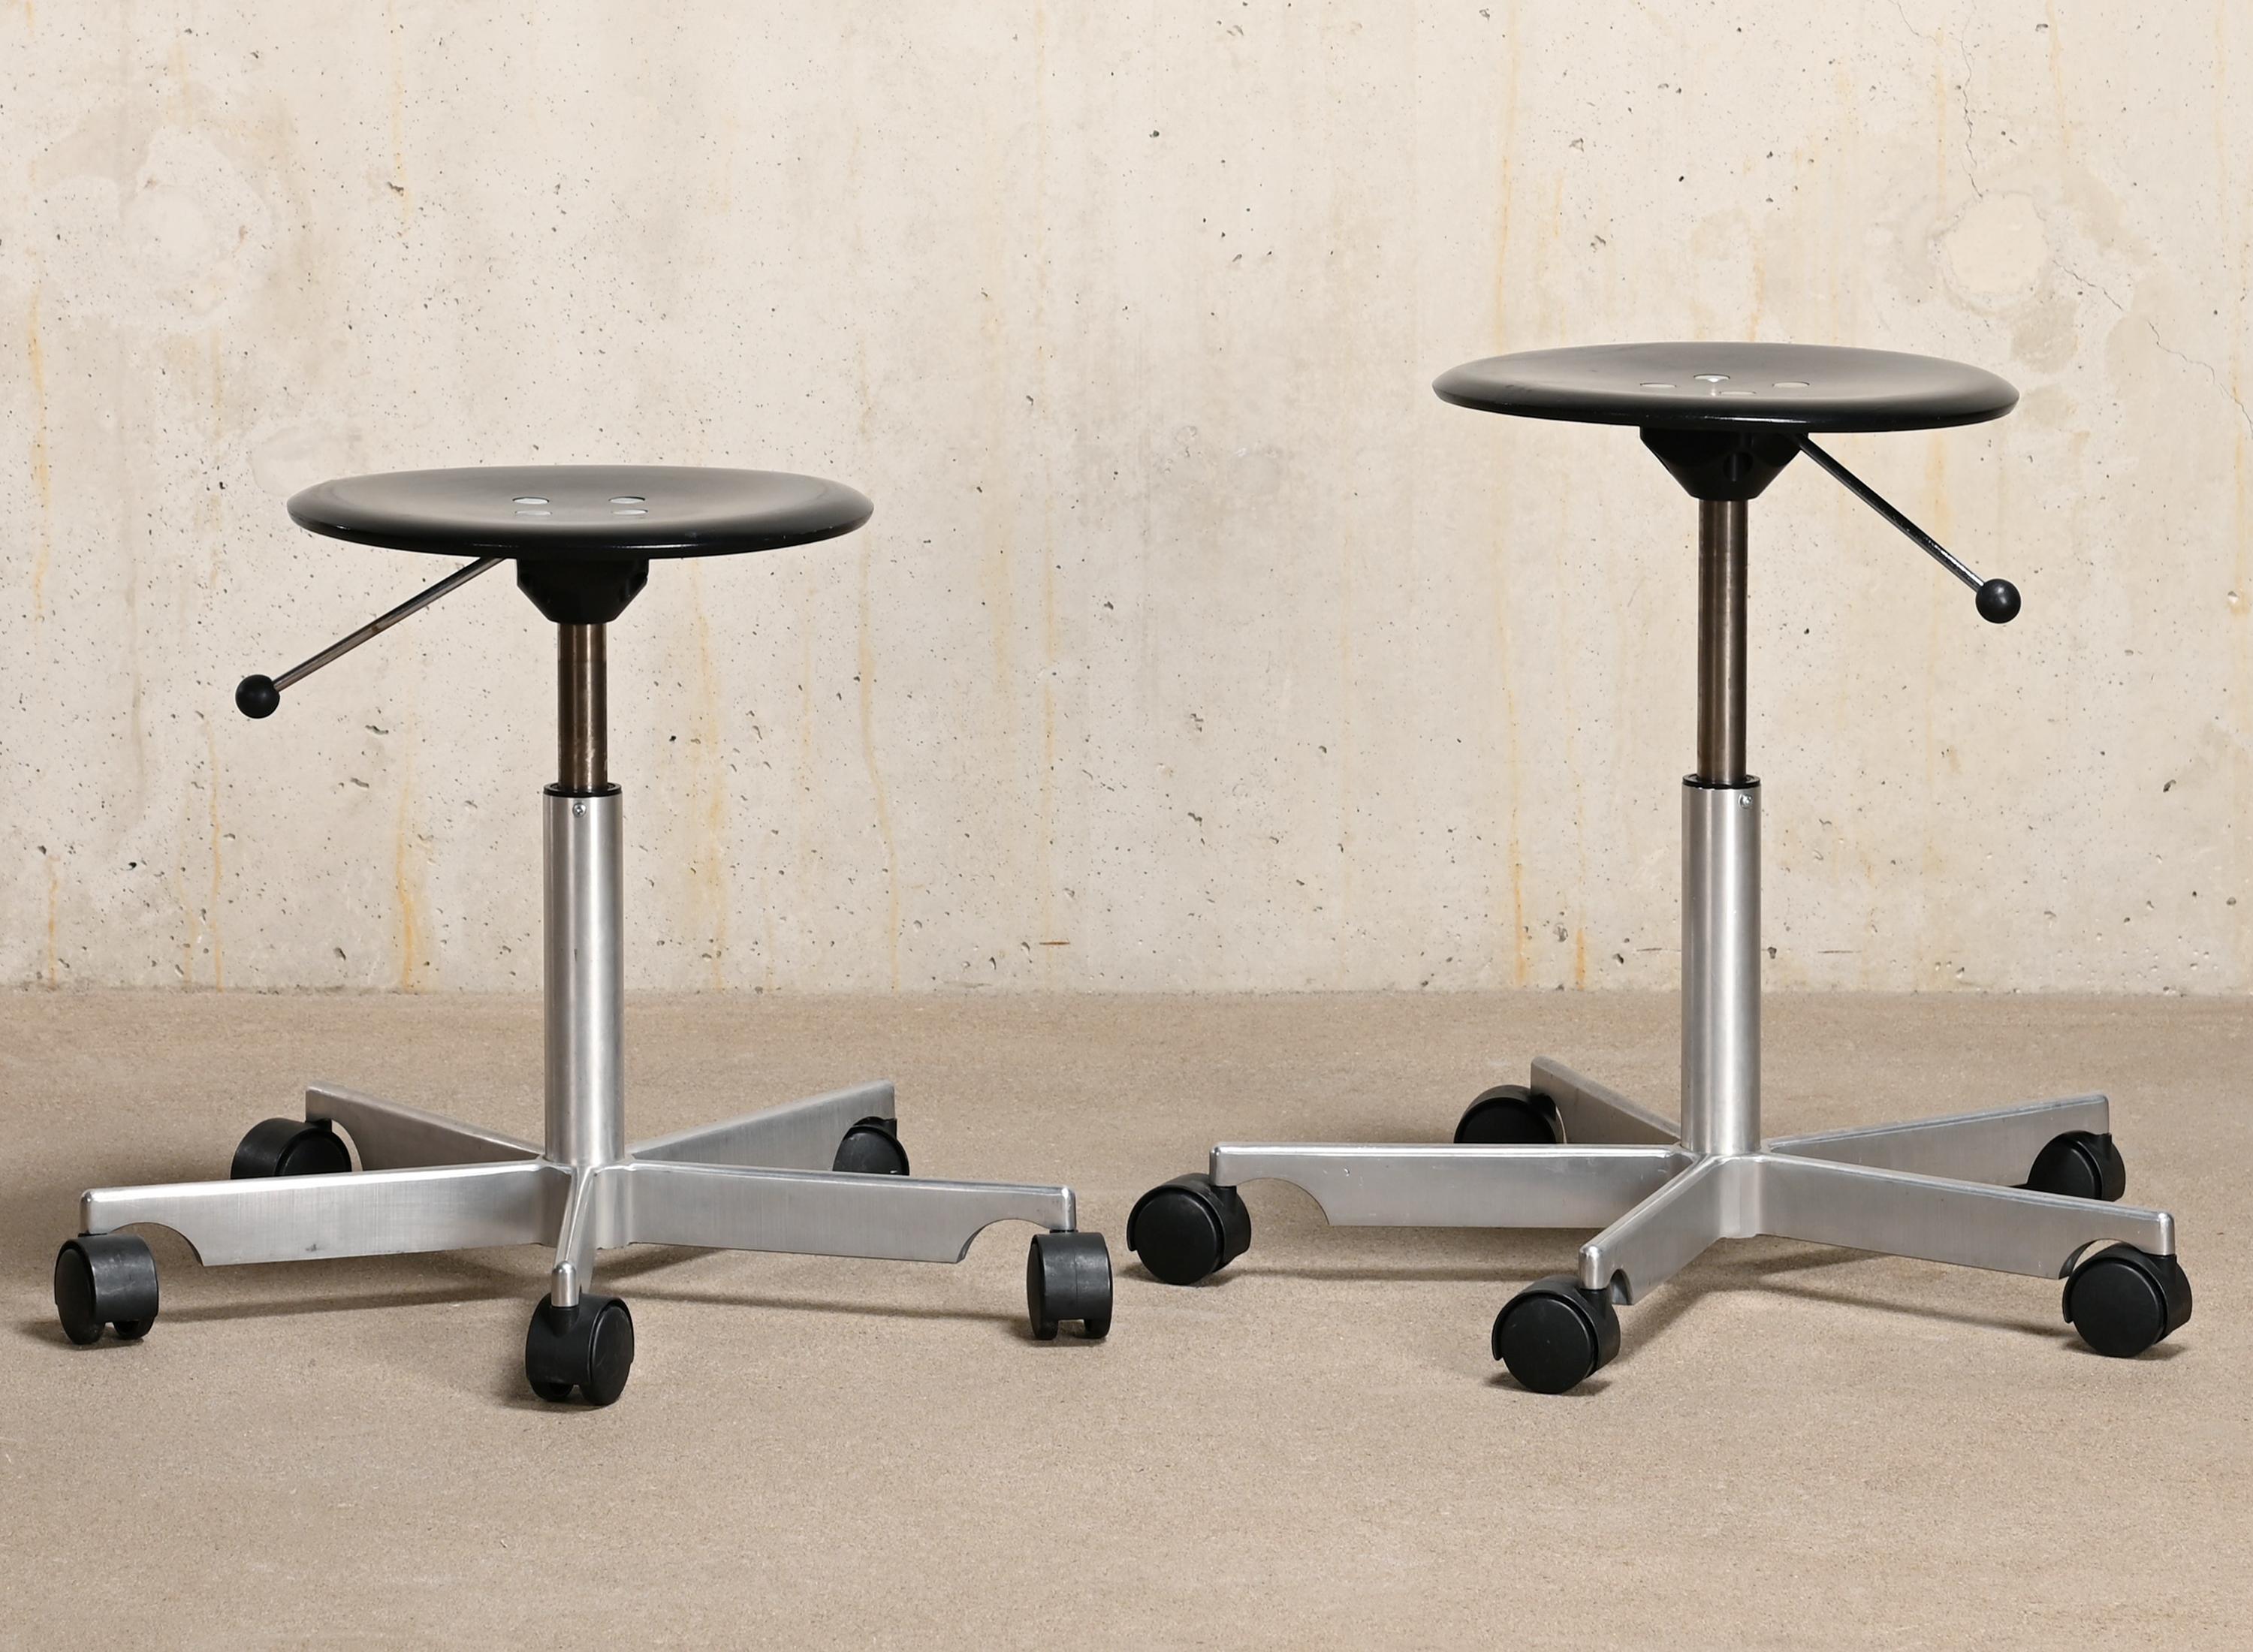 Light weight aluminum swivel stools designed by Jørgen Rasmussen for Fritz Hansen Denmark. Five star polished aluminum foot with black stained ash plywood seats and pneumatic height adjustment. Very good original condition with only light wear.